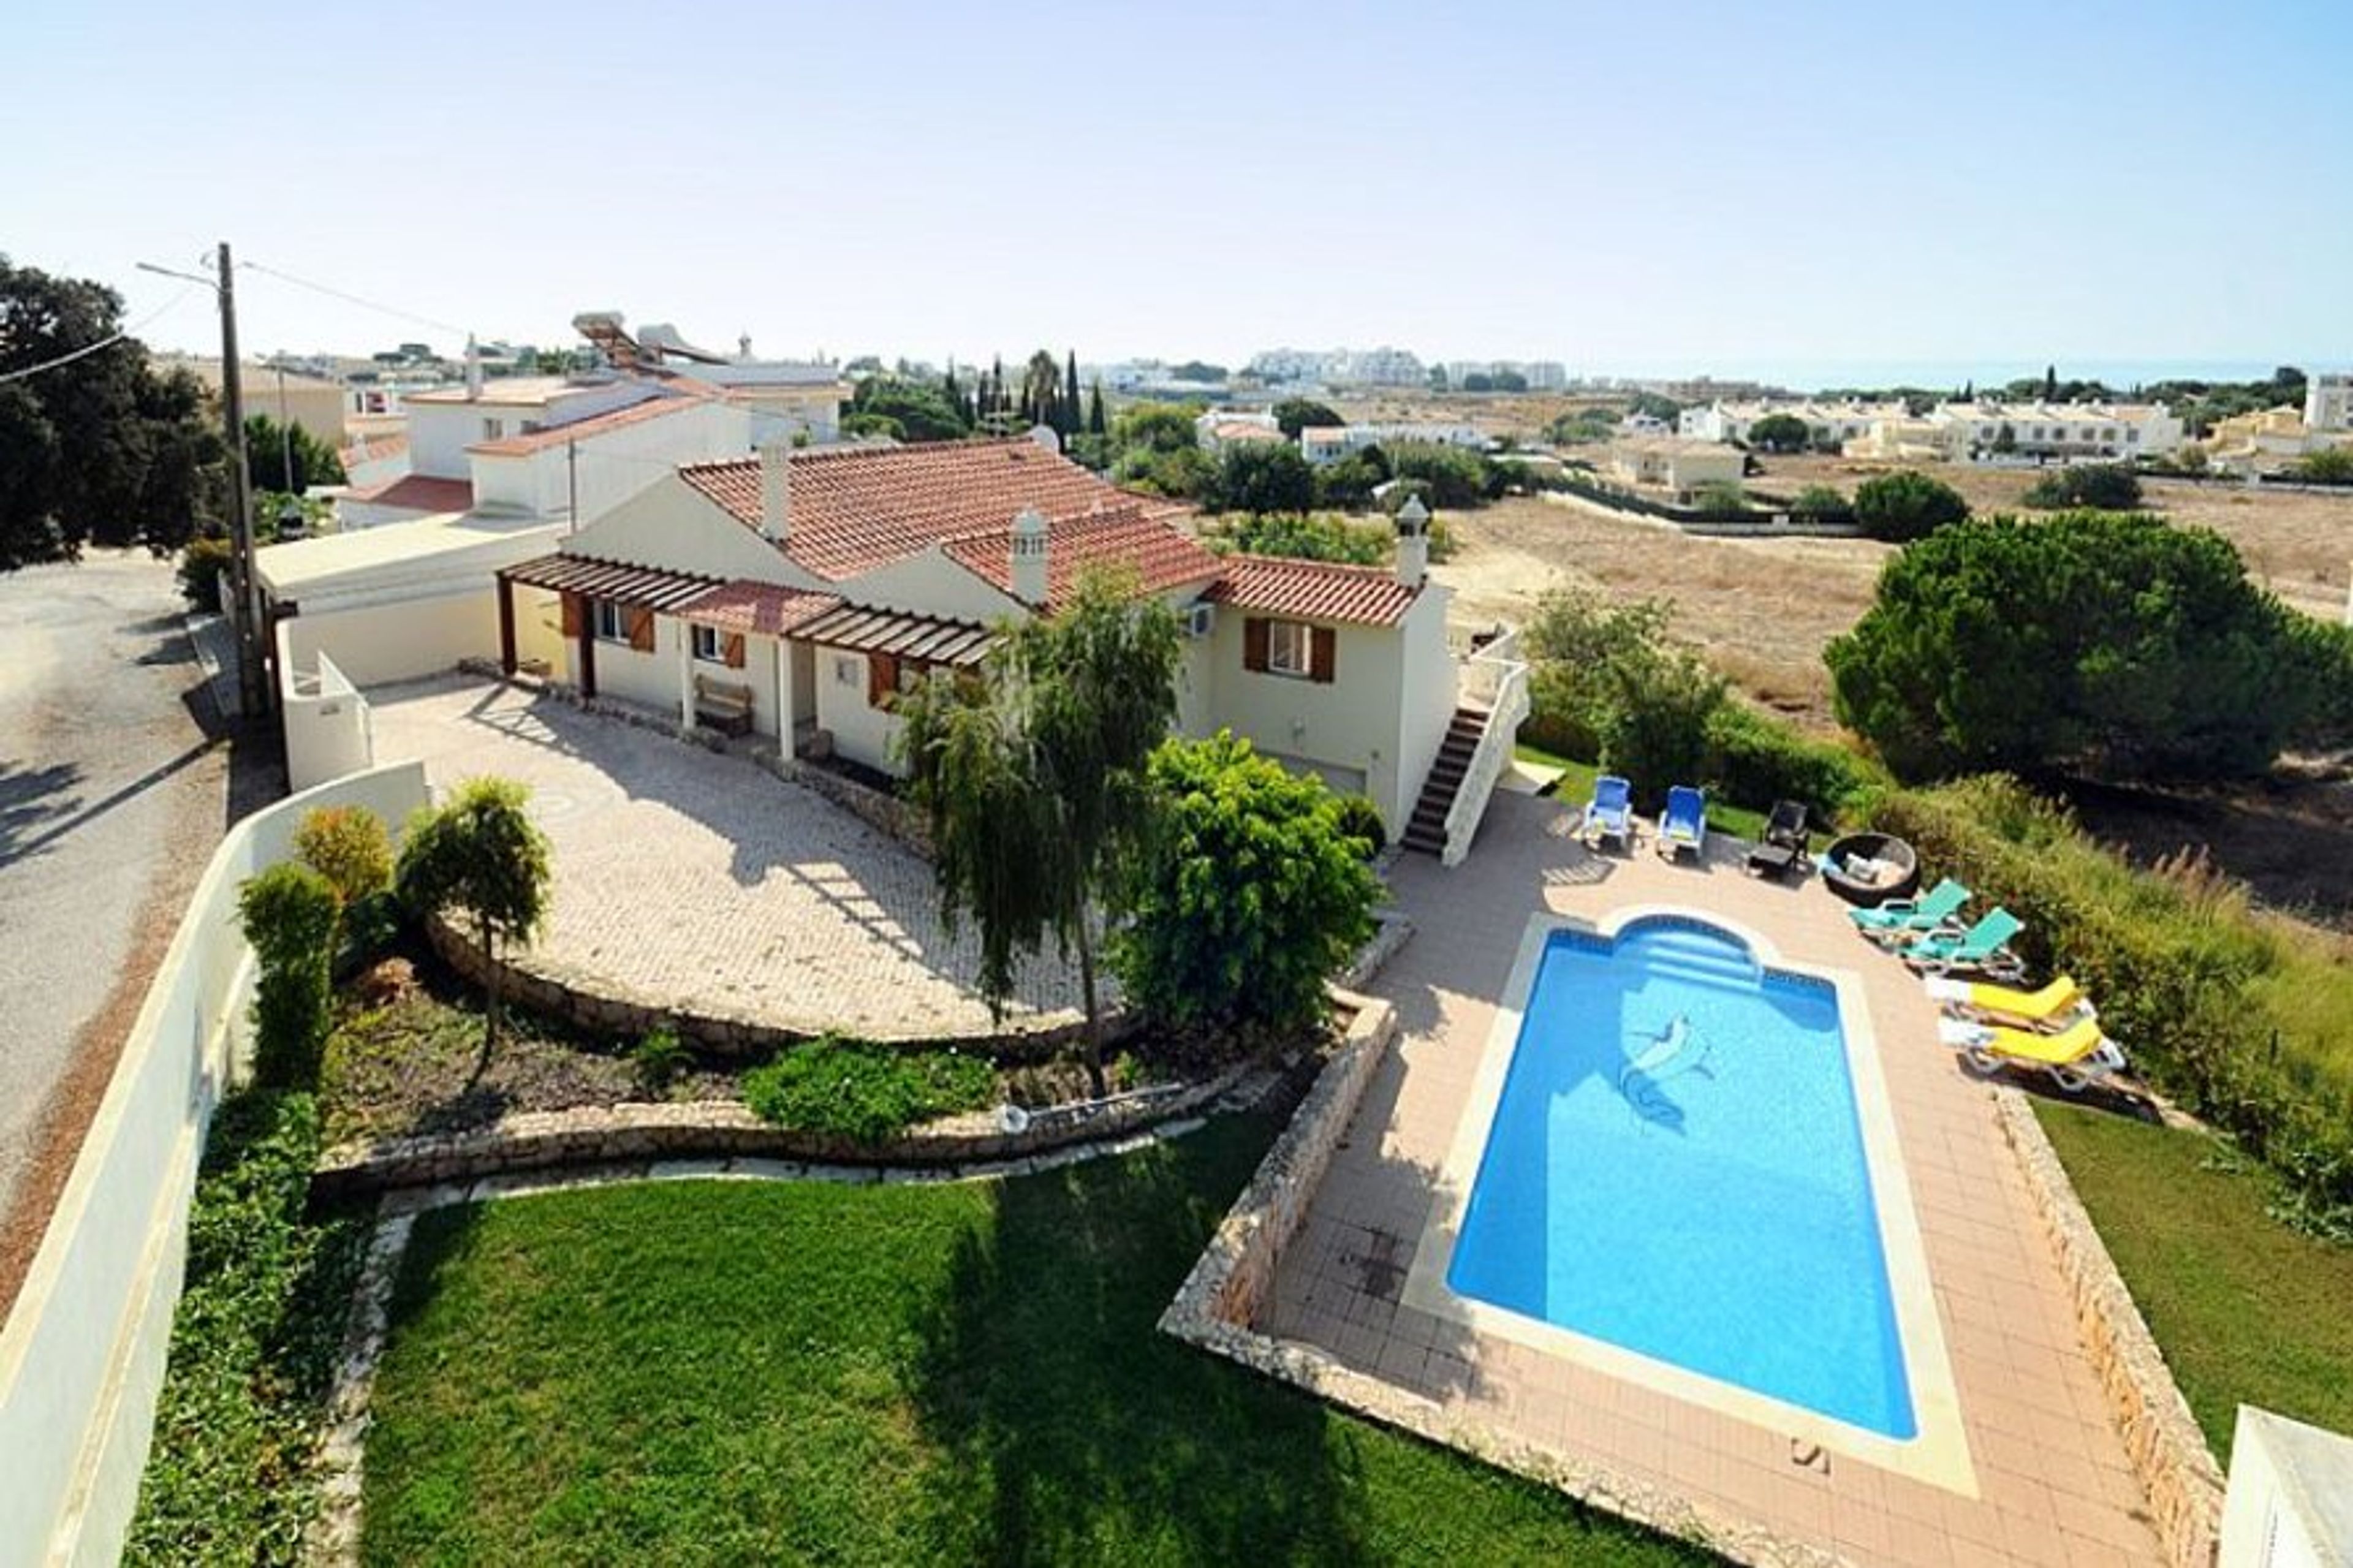 Villa Torre located on a large, private, quiet plot